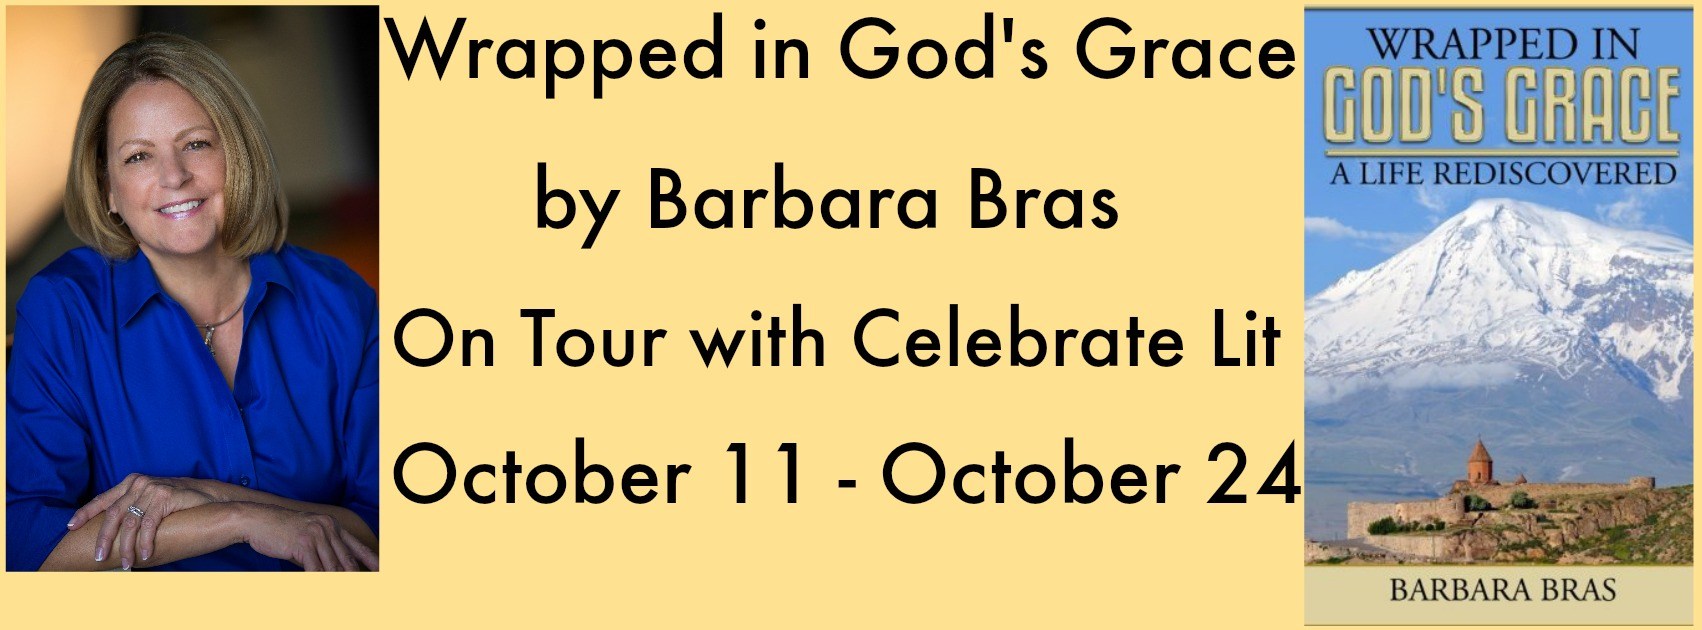 Wrapped in God's Grace- Celebrate Lit Tour